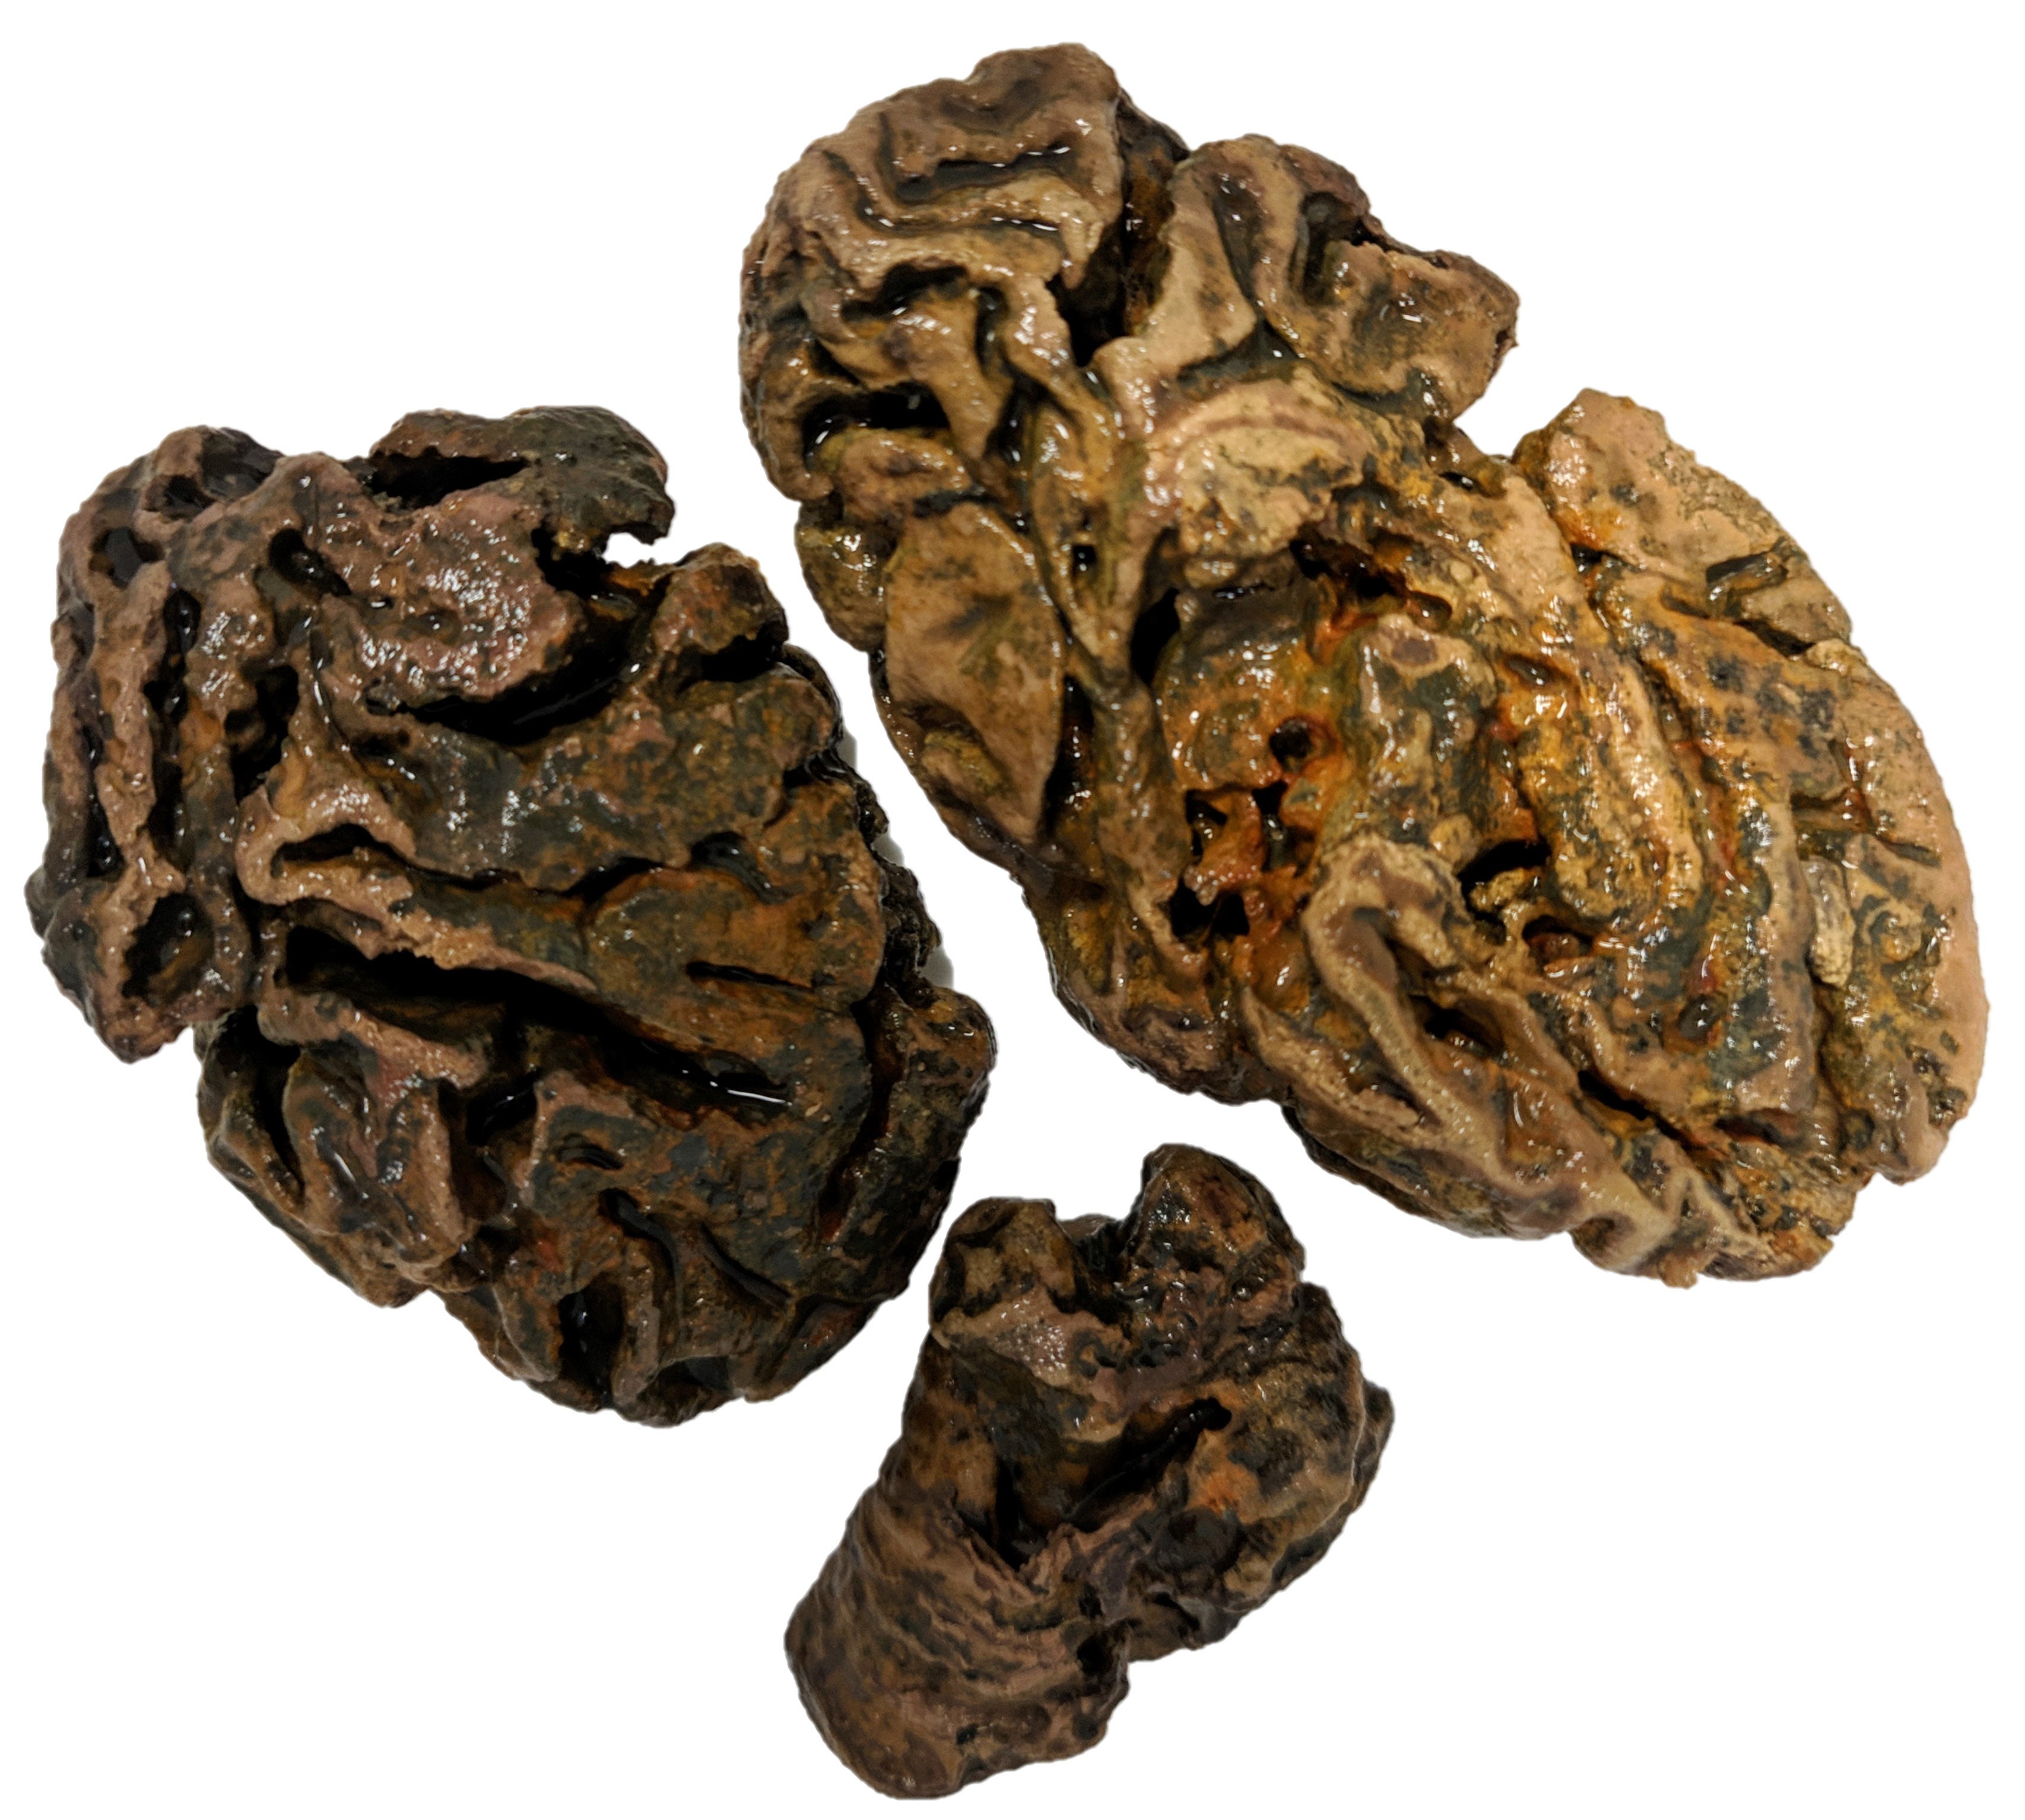 Fragments of the brain from an individual buried in a Victorian workhouse cemetery